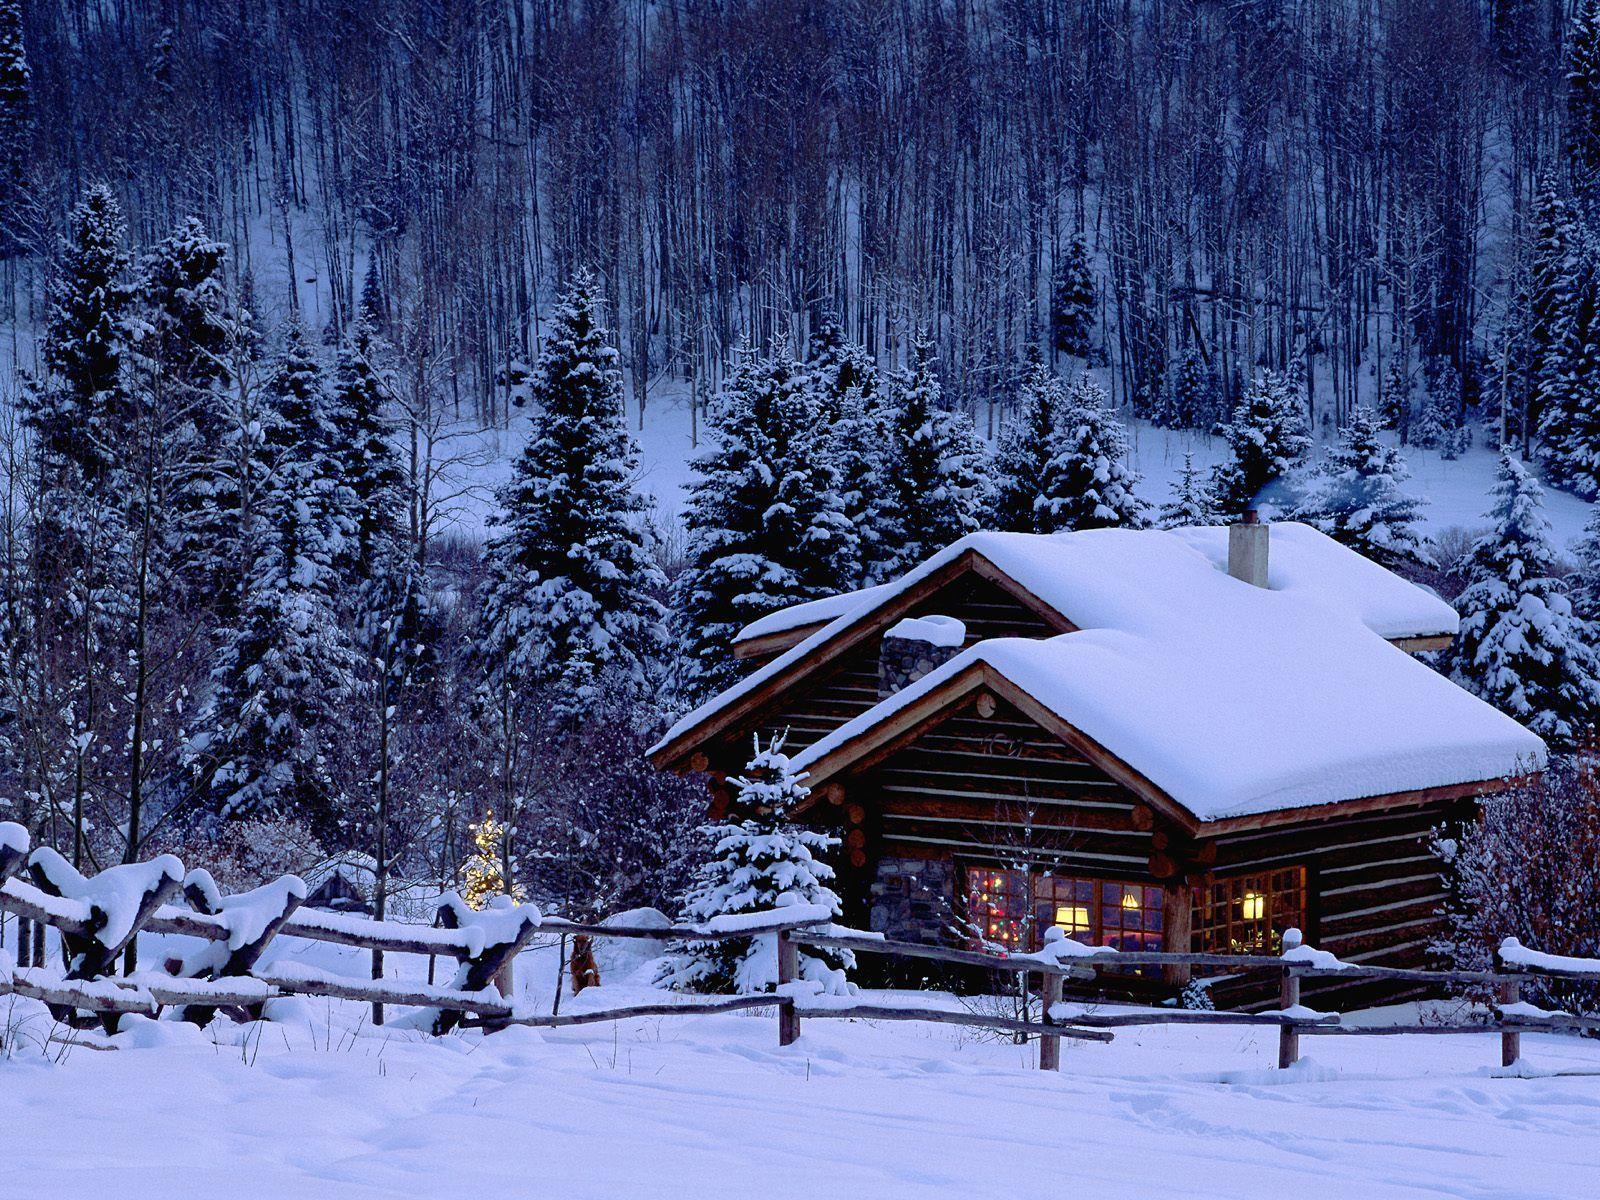 Winter Wallpaper HD For Desktop:Computer Wallpaper. Free Wallpaper Downloads. Winter cabin, Cabins in the woods, Cabins and cottages